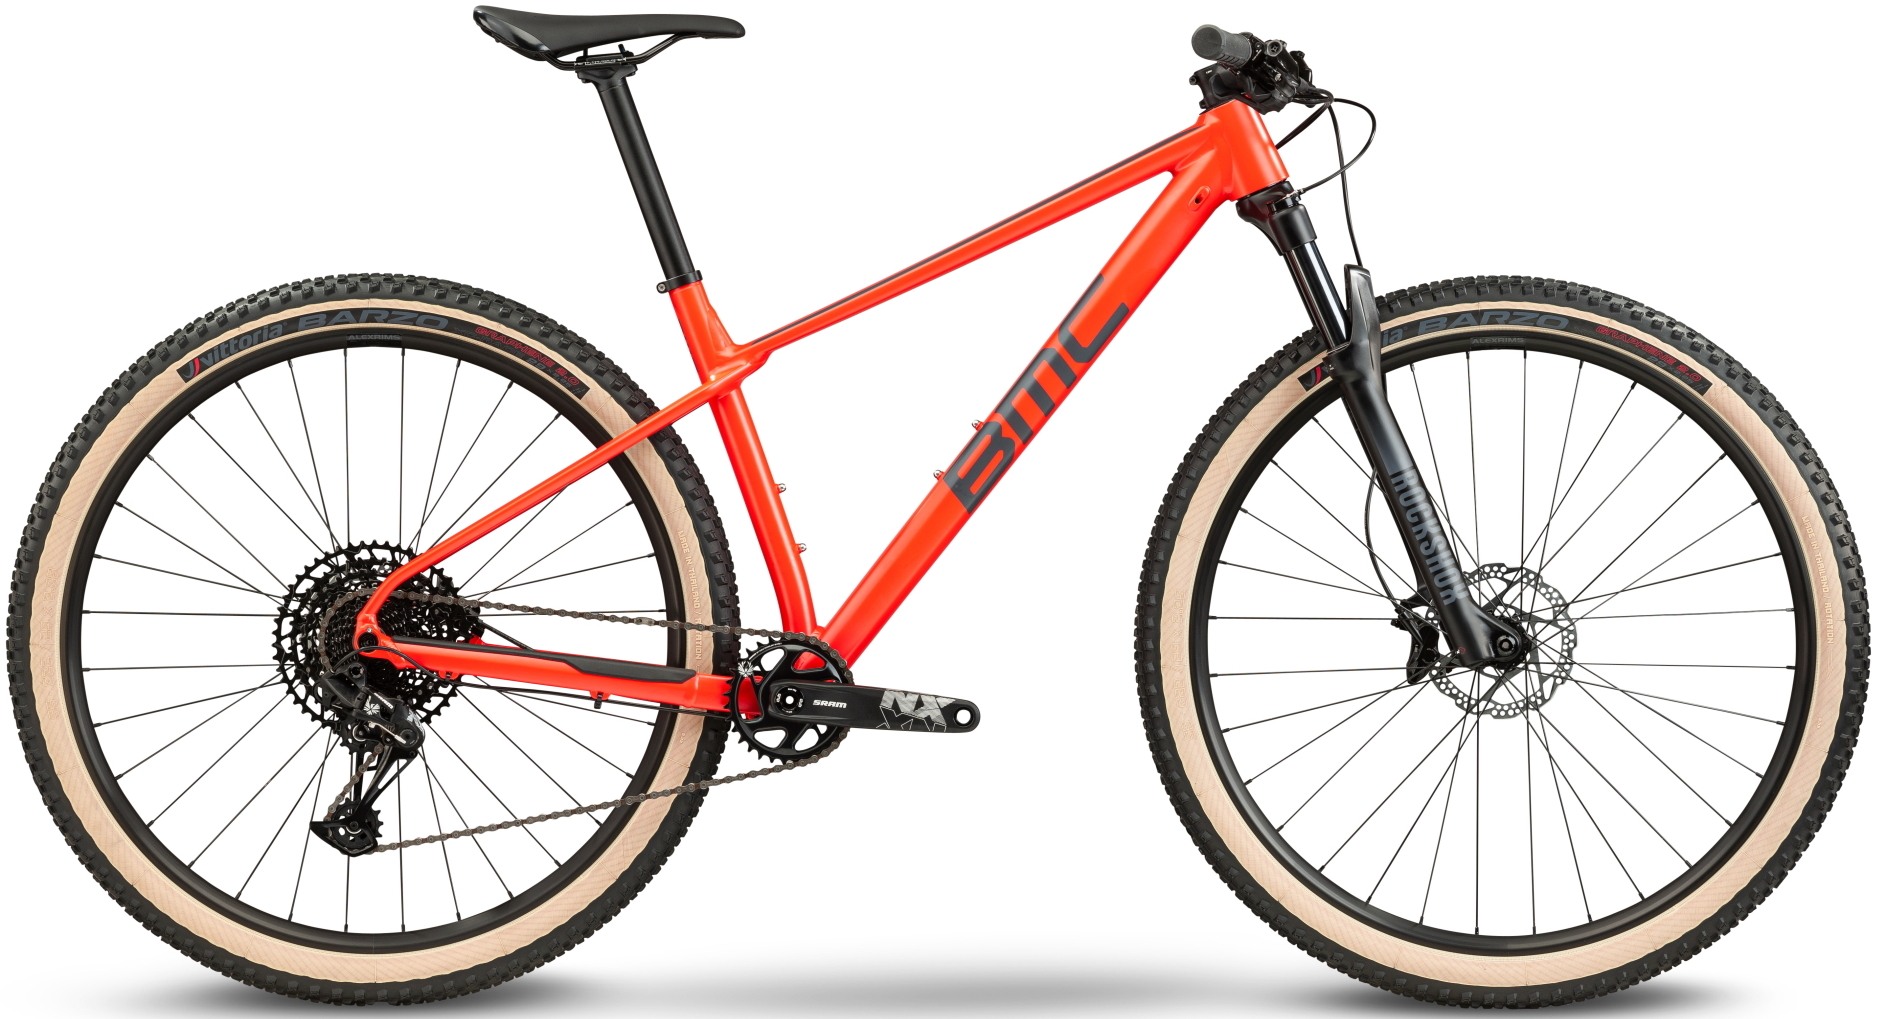 Велосипед 29" BMC TWOSTROKE ONE рама - S 2021 RED/GRY/GRY